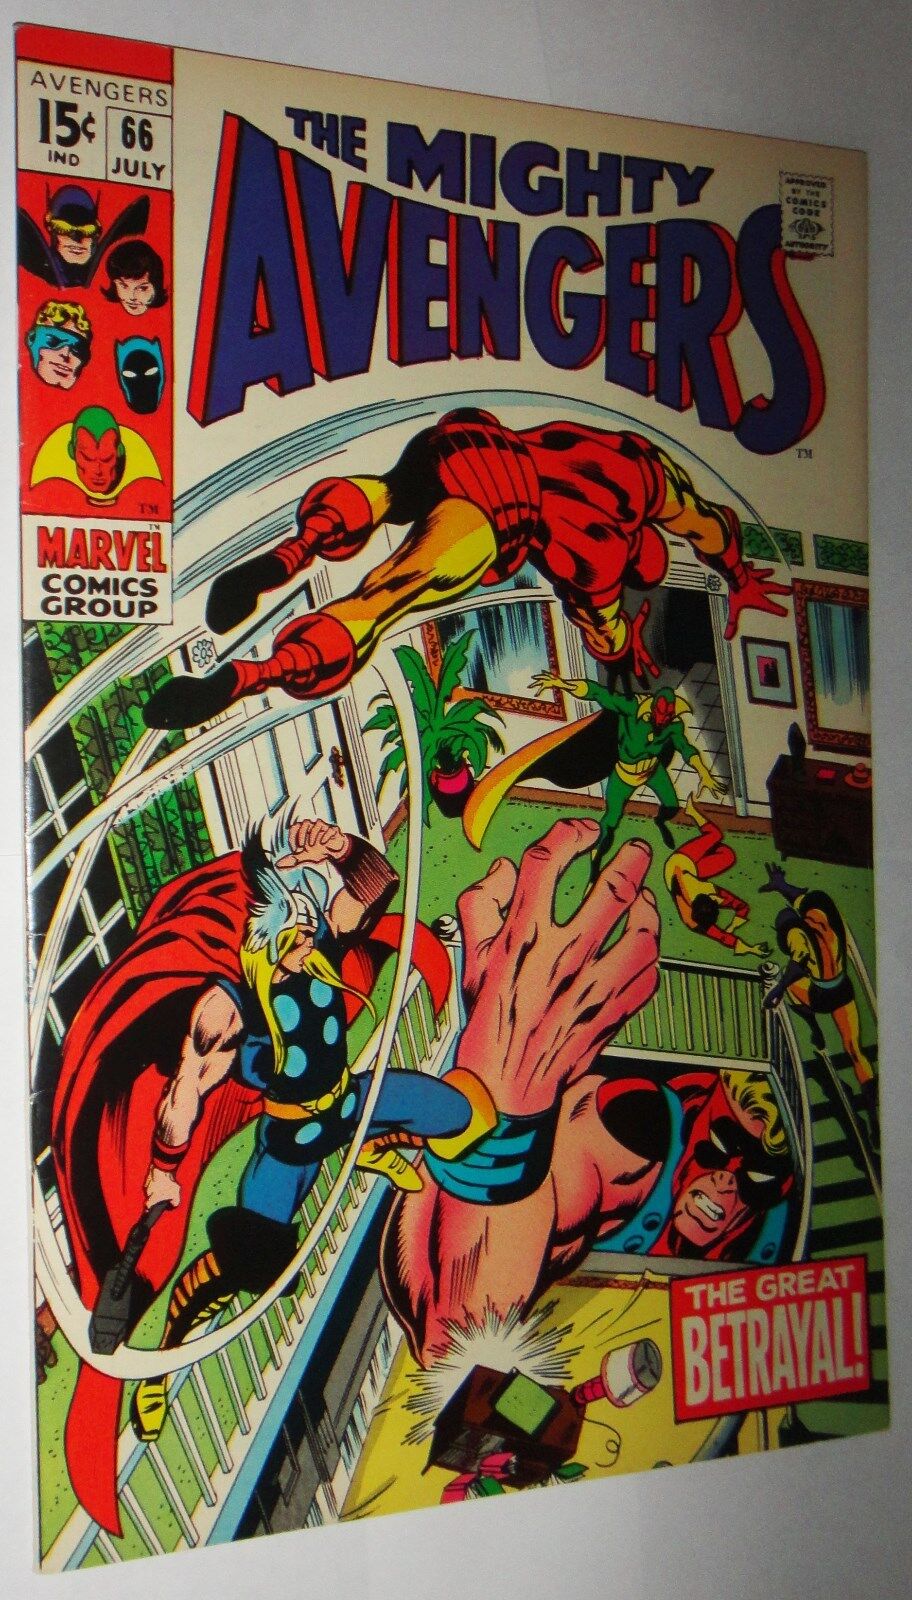 AVENGERS #66 BARRY SMITH ULTRON NEWSTAND FRESH 9.6 W/OW PAGES